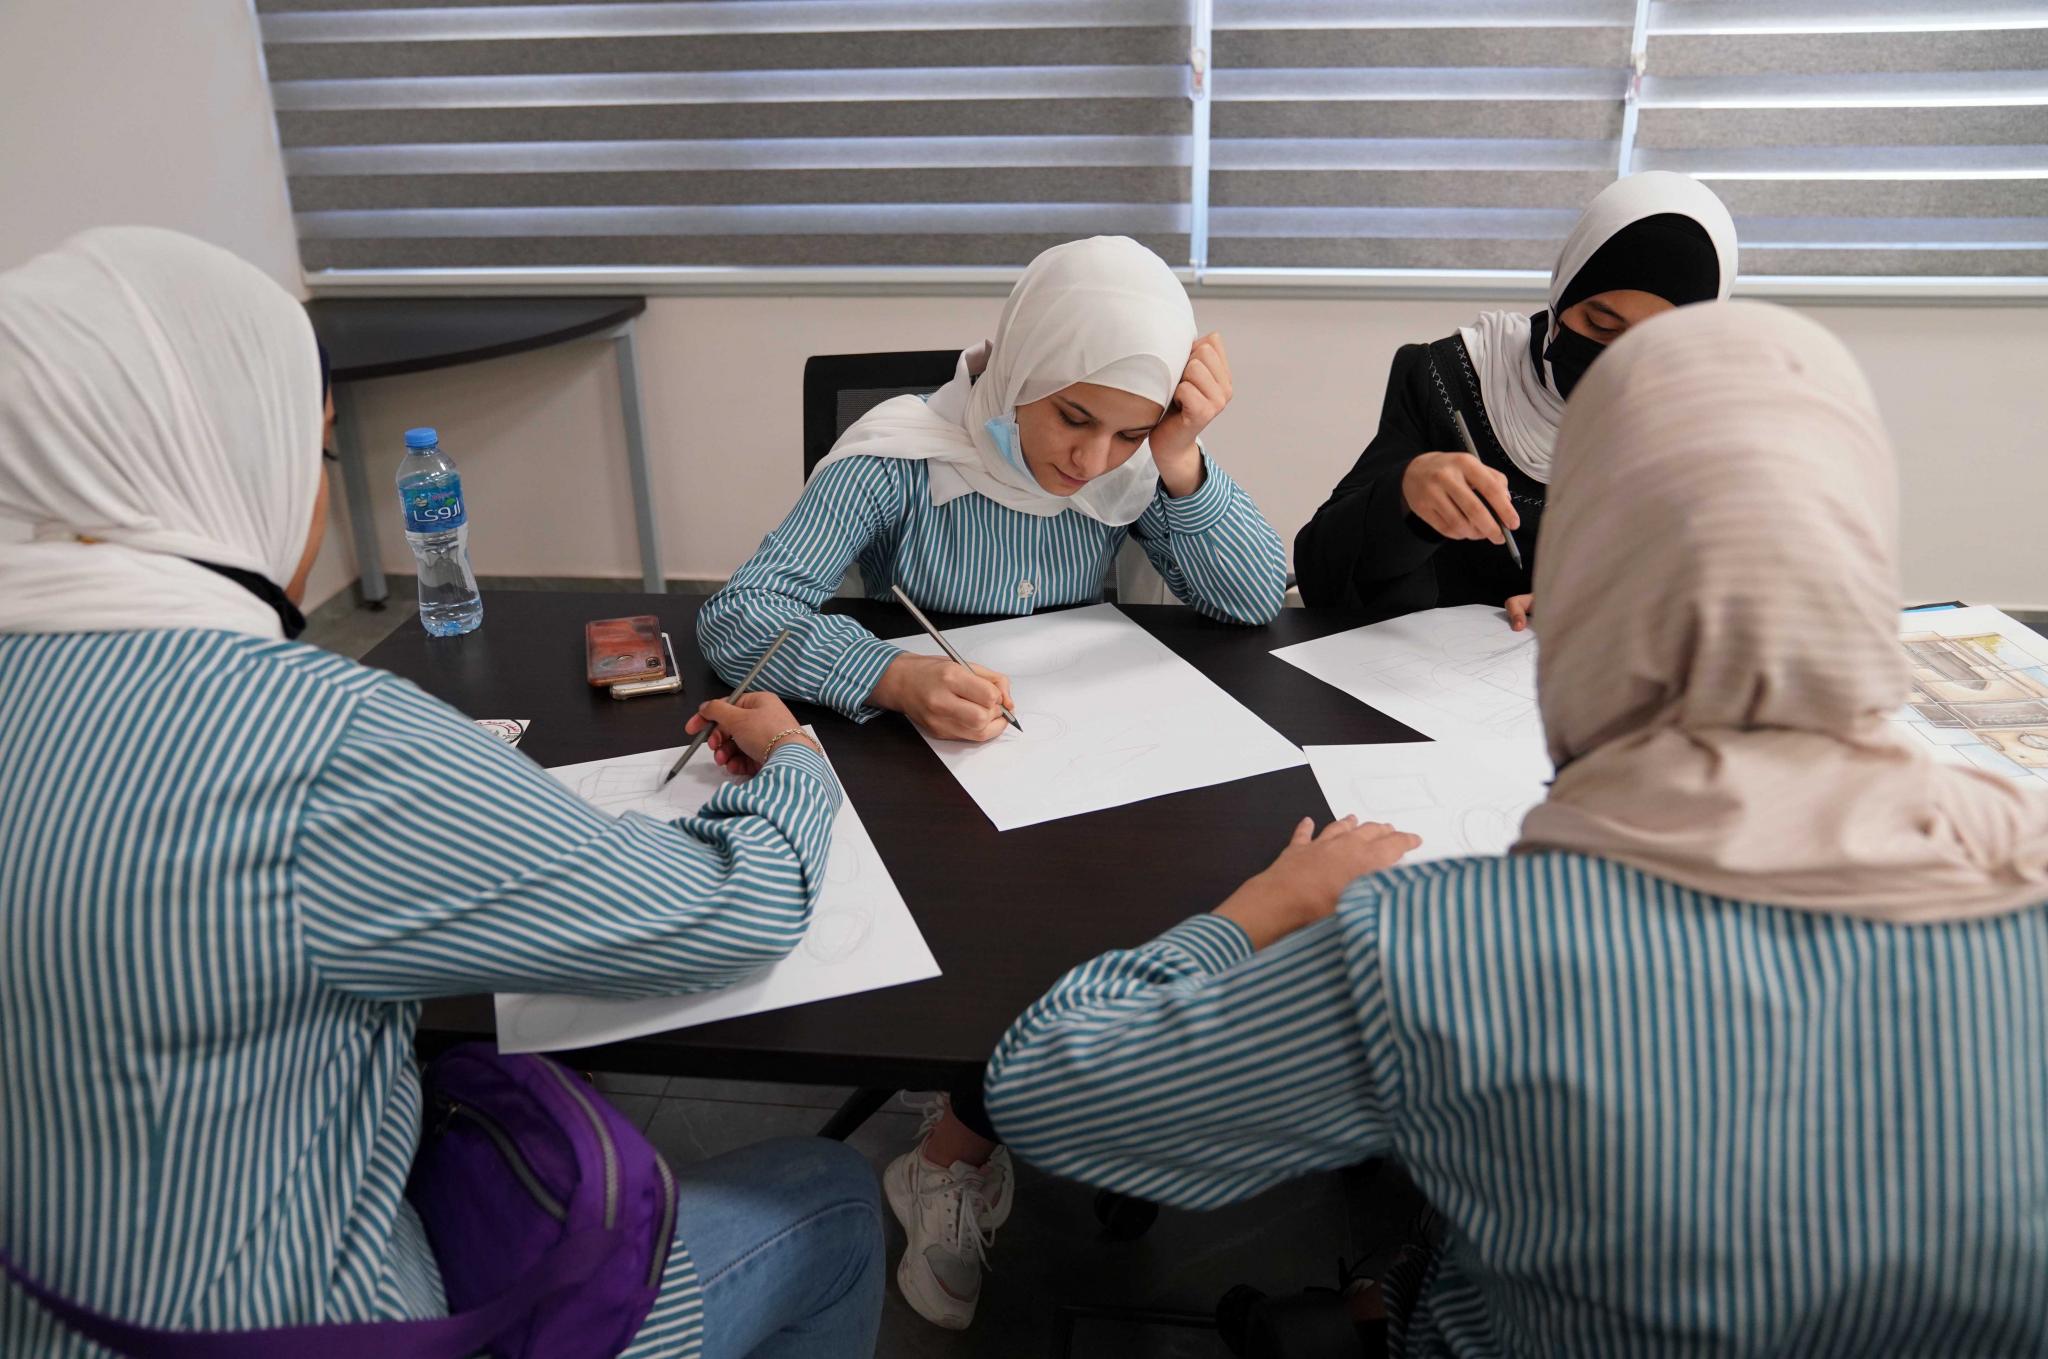 Under Joint Partnership between AAUP and the Ministry of Education, AAUP Organizes Workshops for School Students